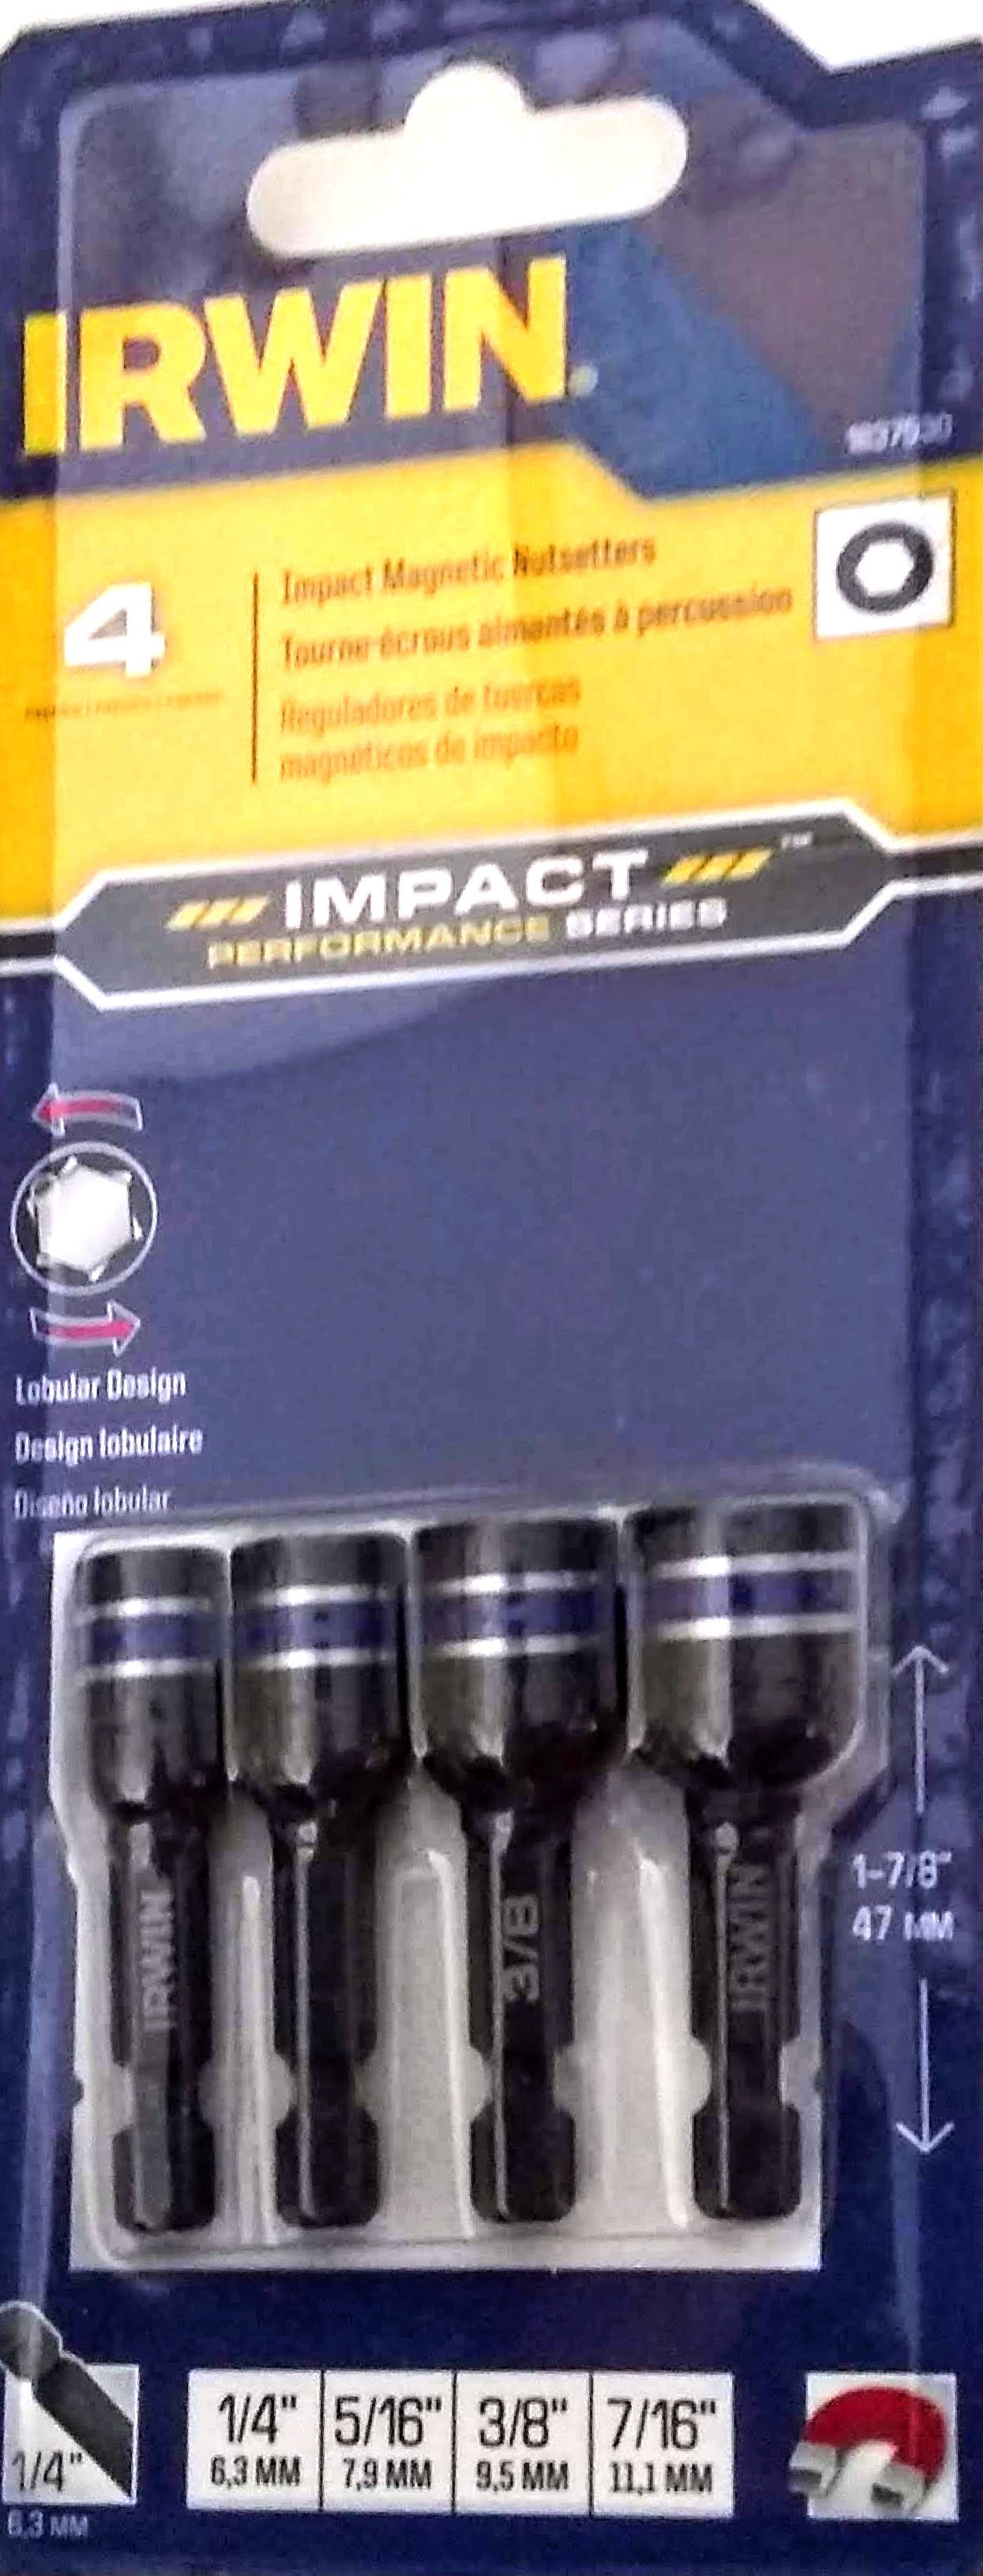 IRWIN 1837530 4 PC IMPACT MAGNETIC NUTSETTER SET 1/4, 5/16, 3/8, 7/16 NUT DRIVER